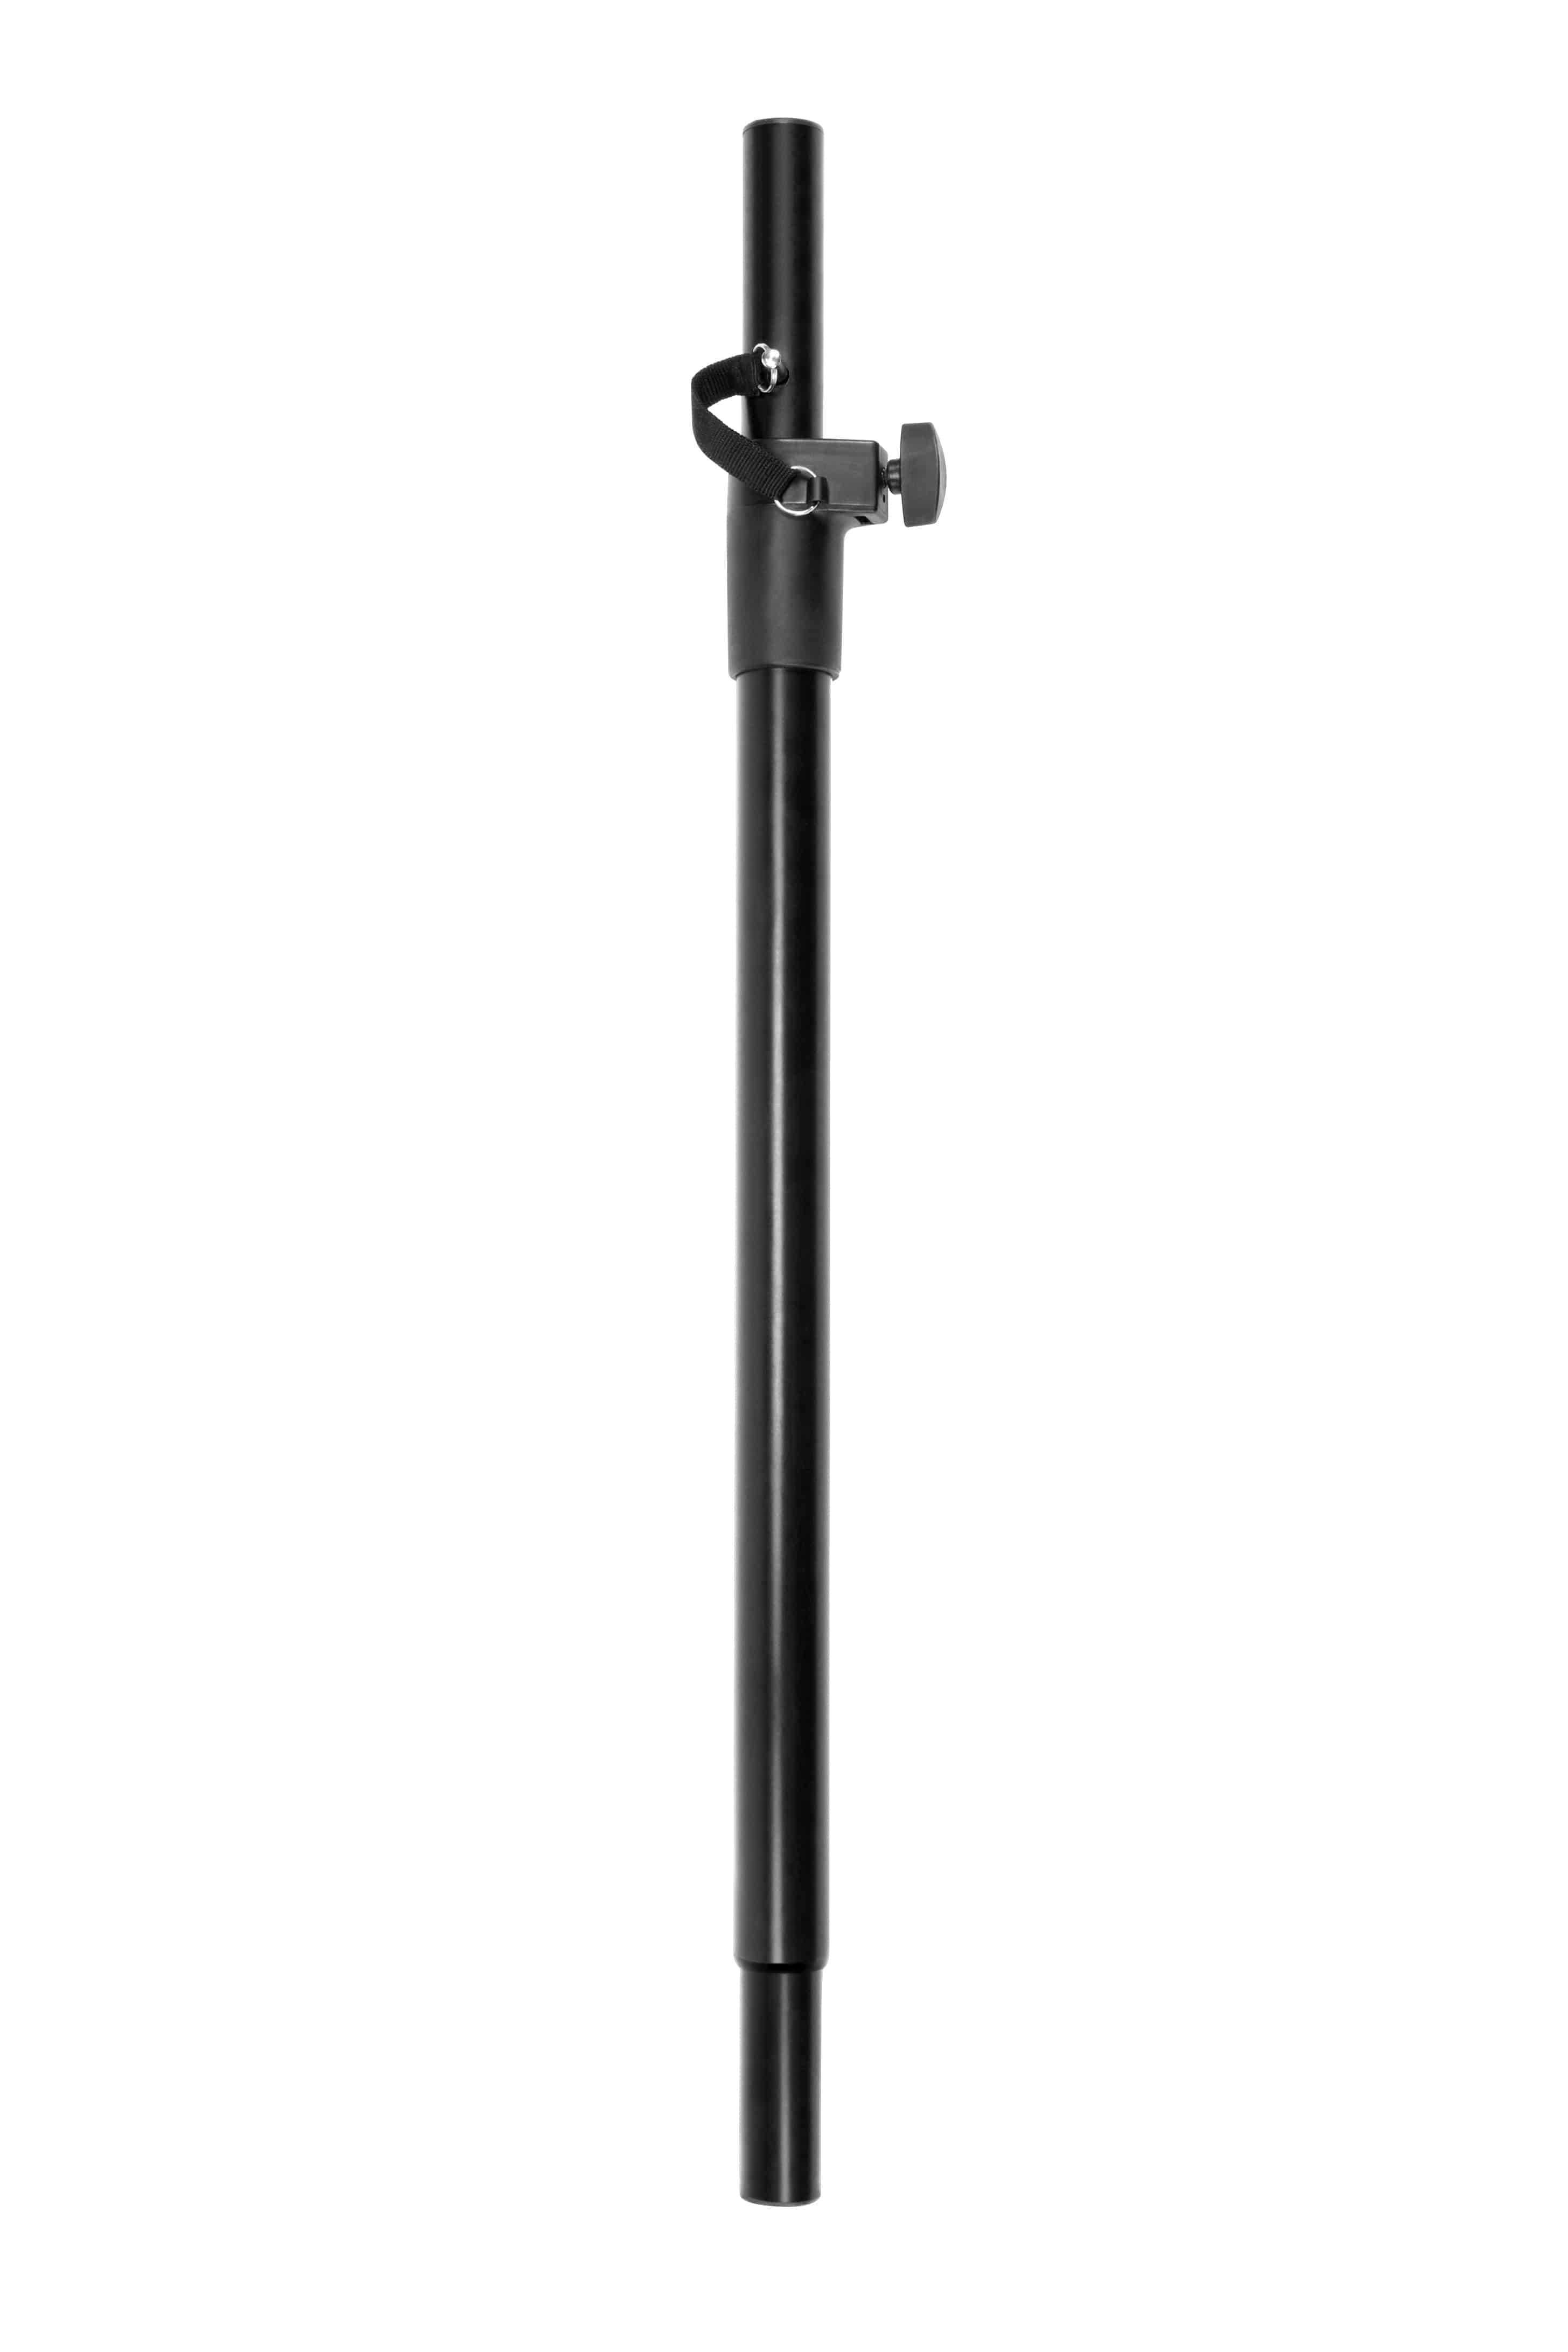 Mackie SPM200 Speaker Pole Mount for TH, SRM and HD - Hollywood DJ